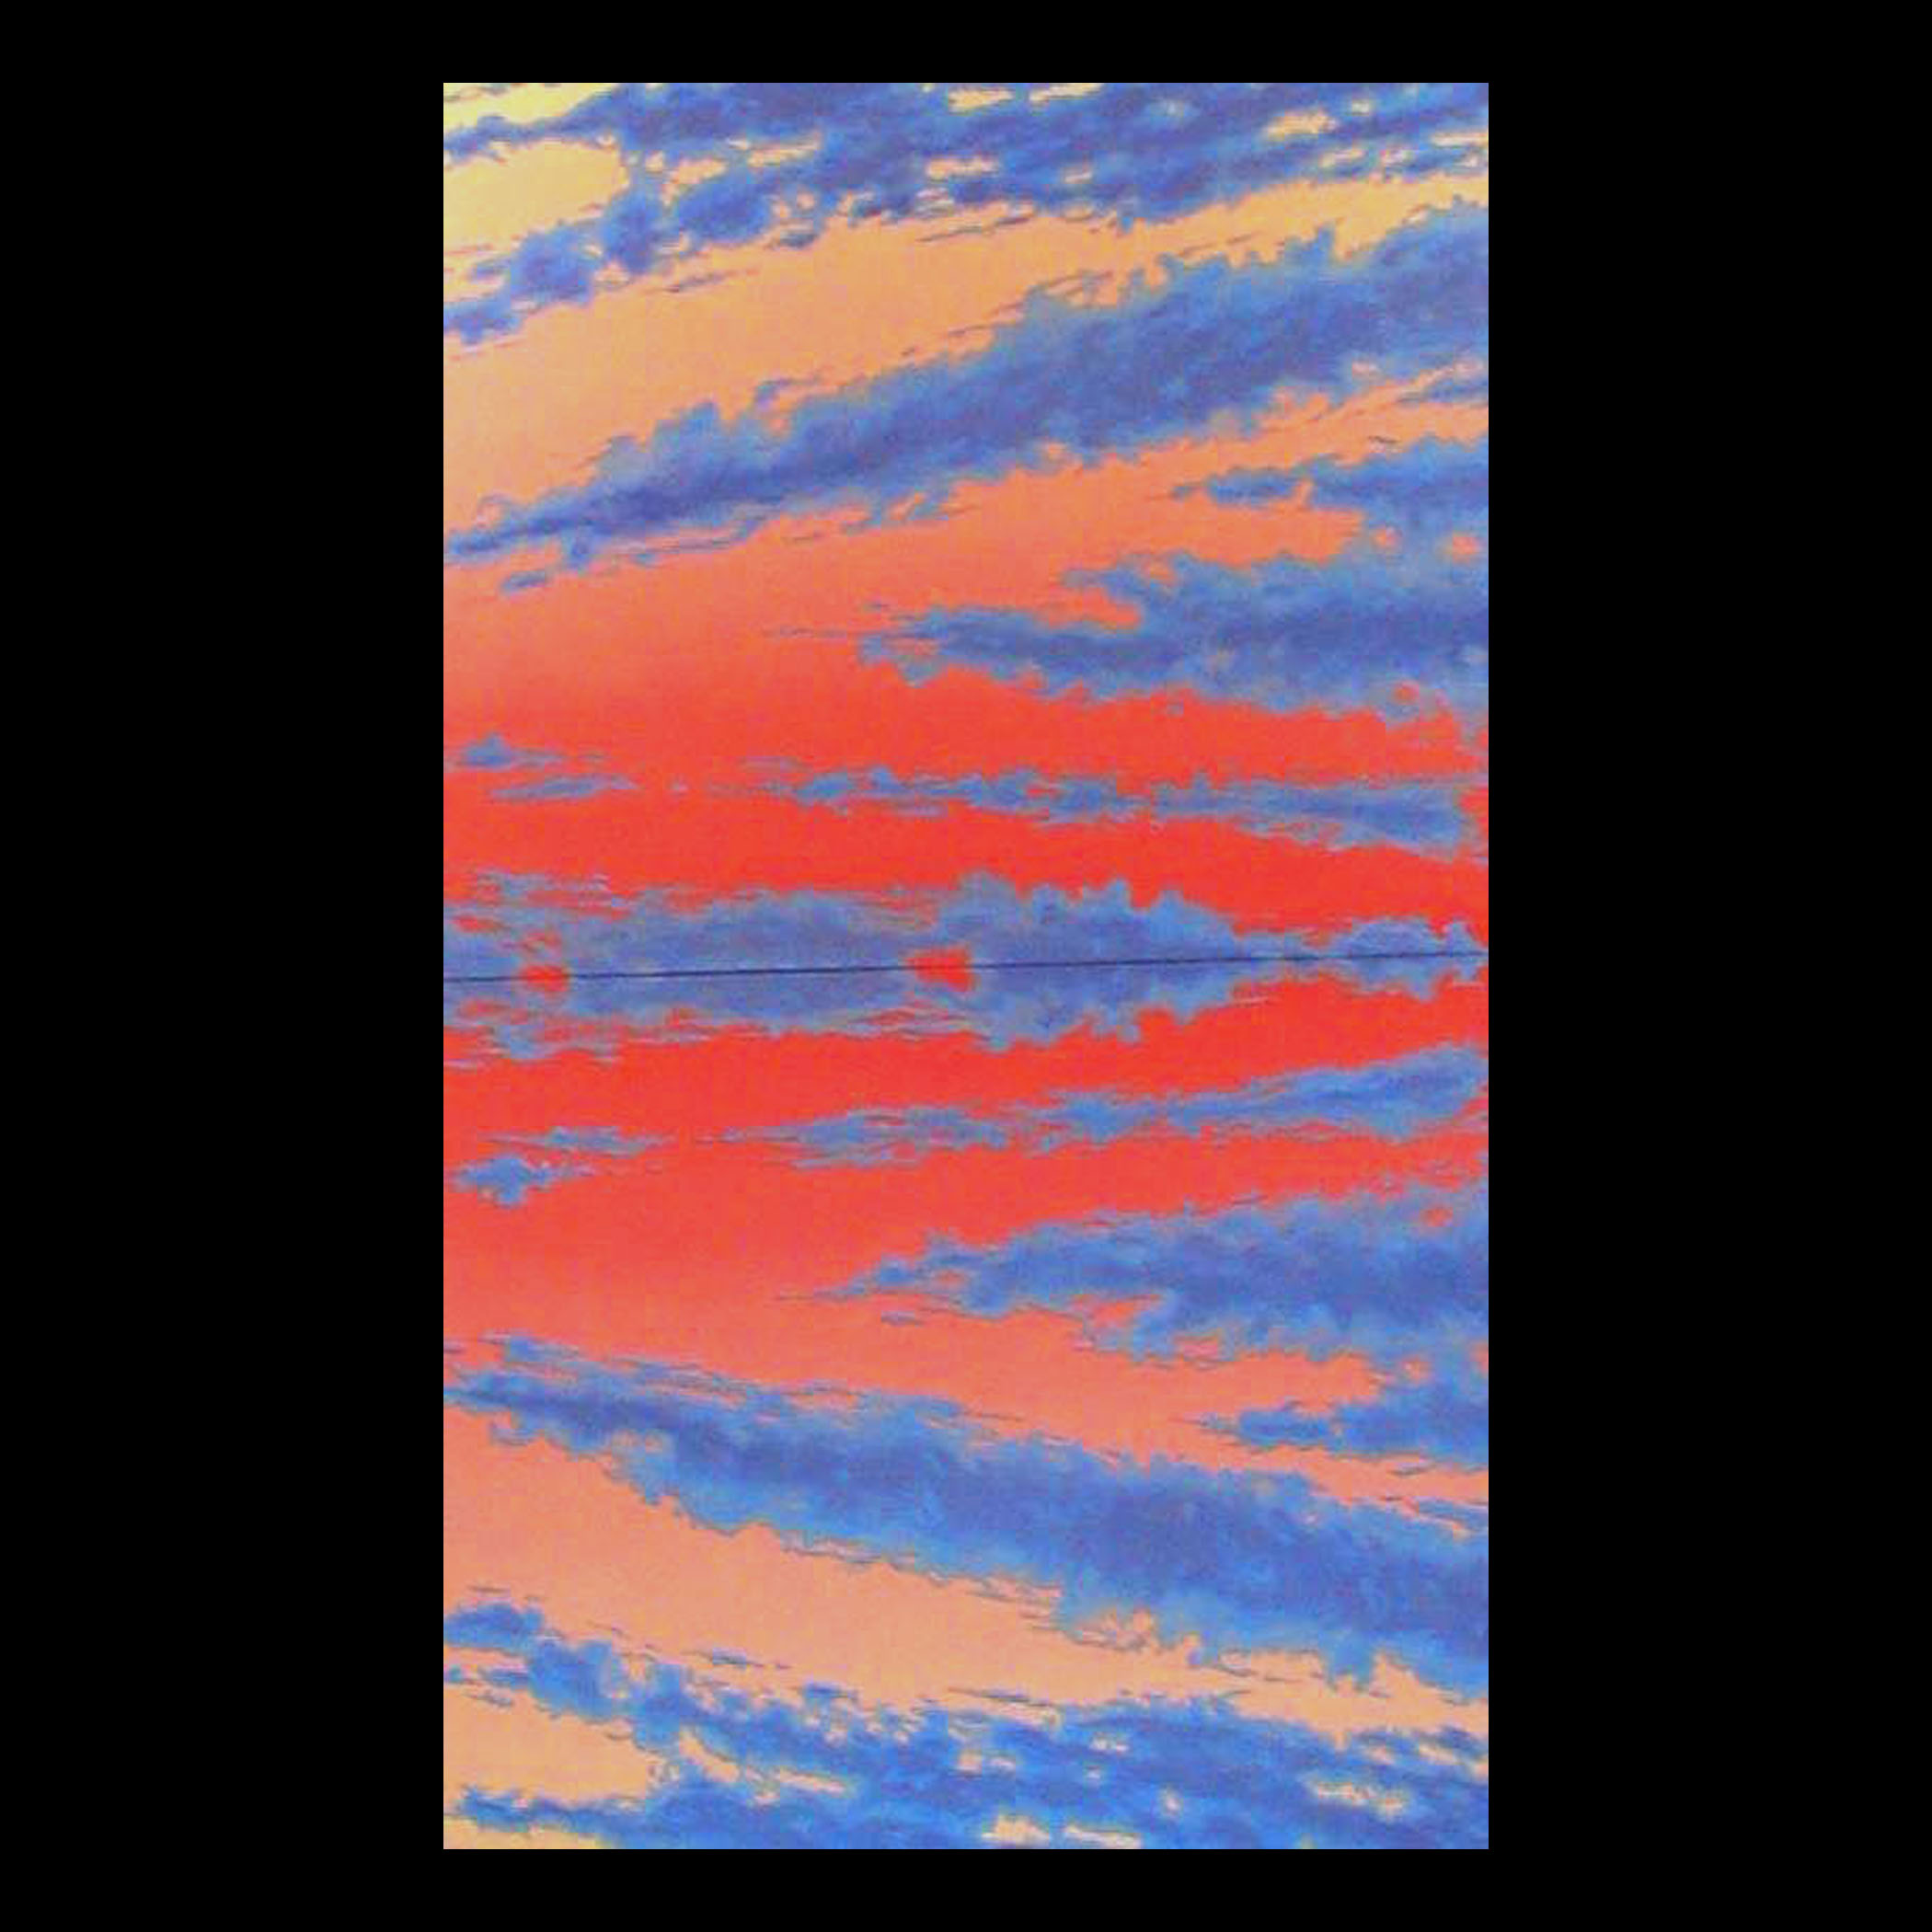 James Gwynne, 'Mirrored Sunset Sky', 2003, original Painting Oil, 50 x 82  x 3 inches. Artwork description: 1911 Two canvases joined together to give the impression of a mirrored image of the sky at sunset....